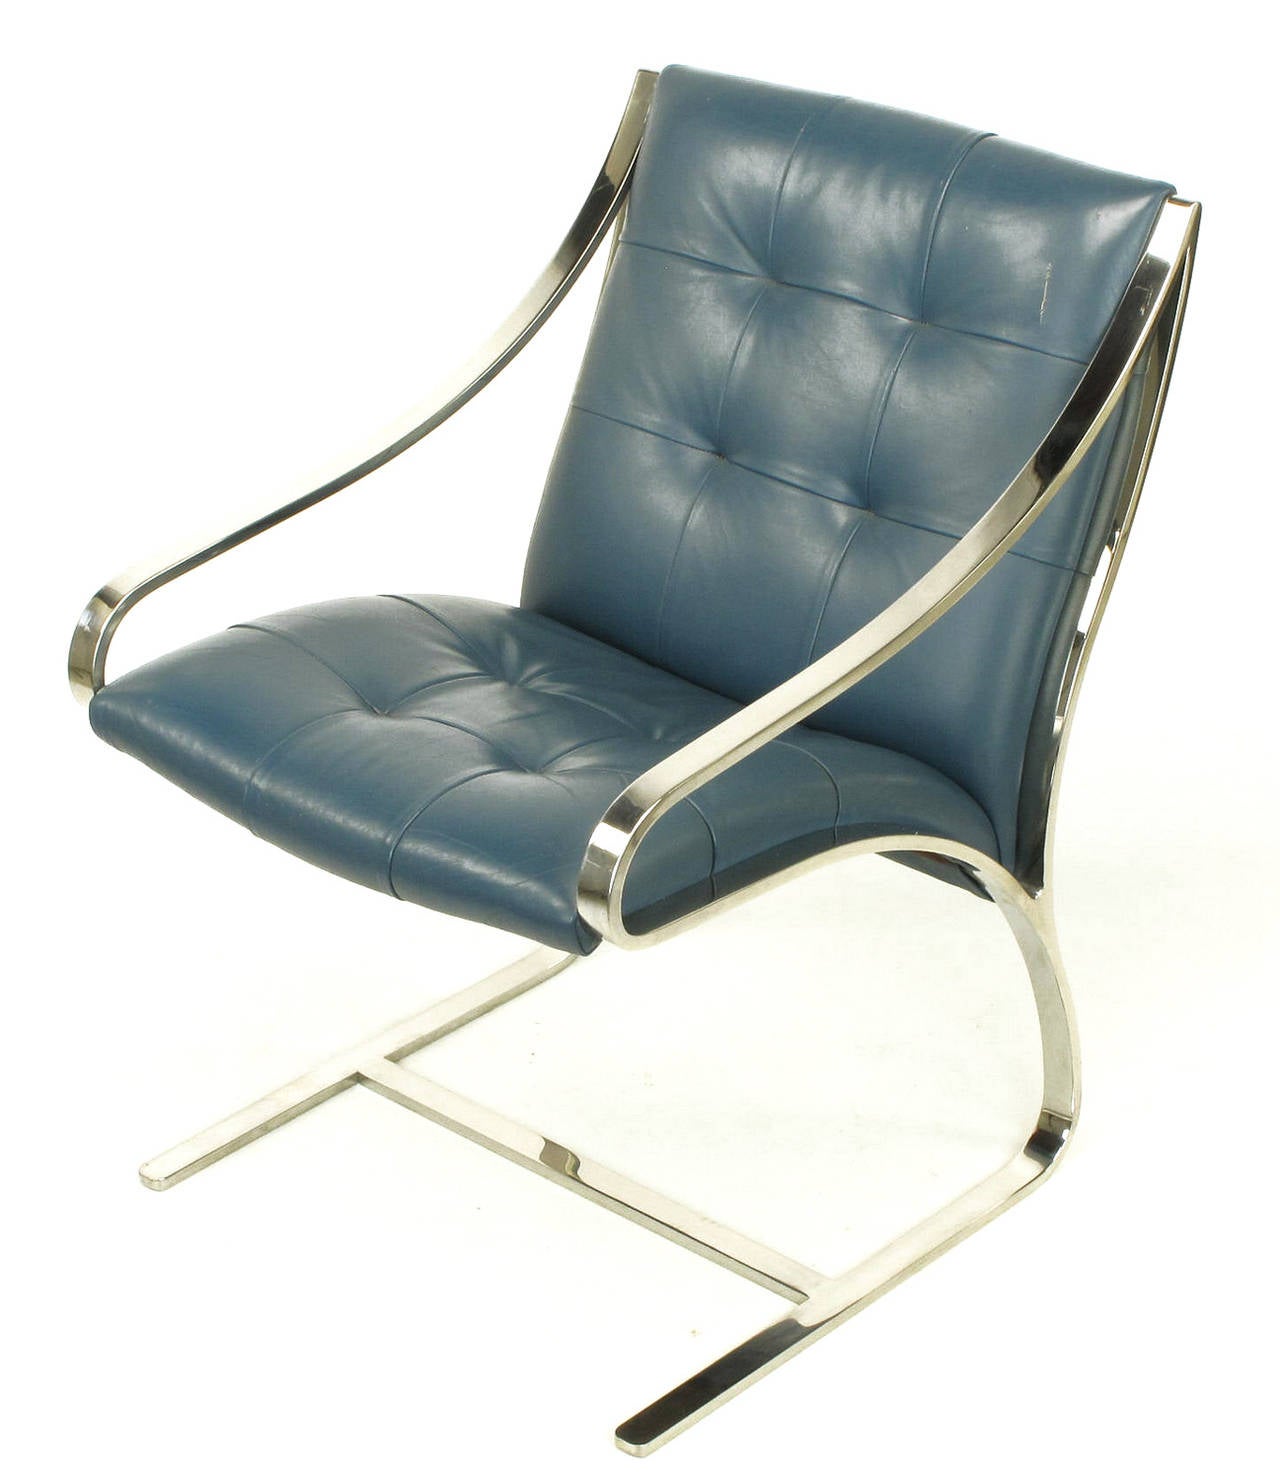 Four Bert England for Brueton Polished Steel & Cadet Blue Leather Lounge Chairs In Good Condition For Sale In Chicago, IL